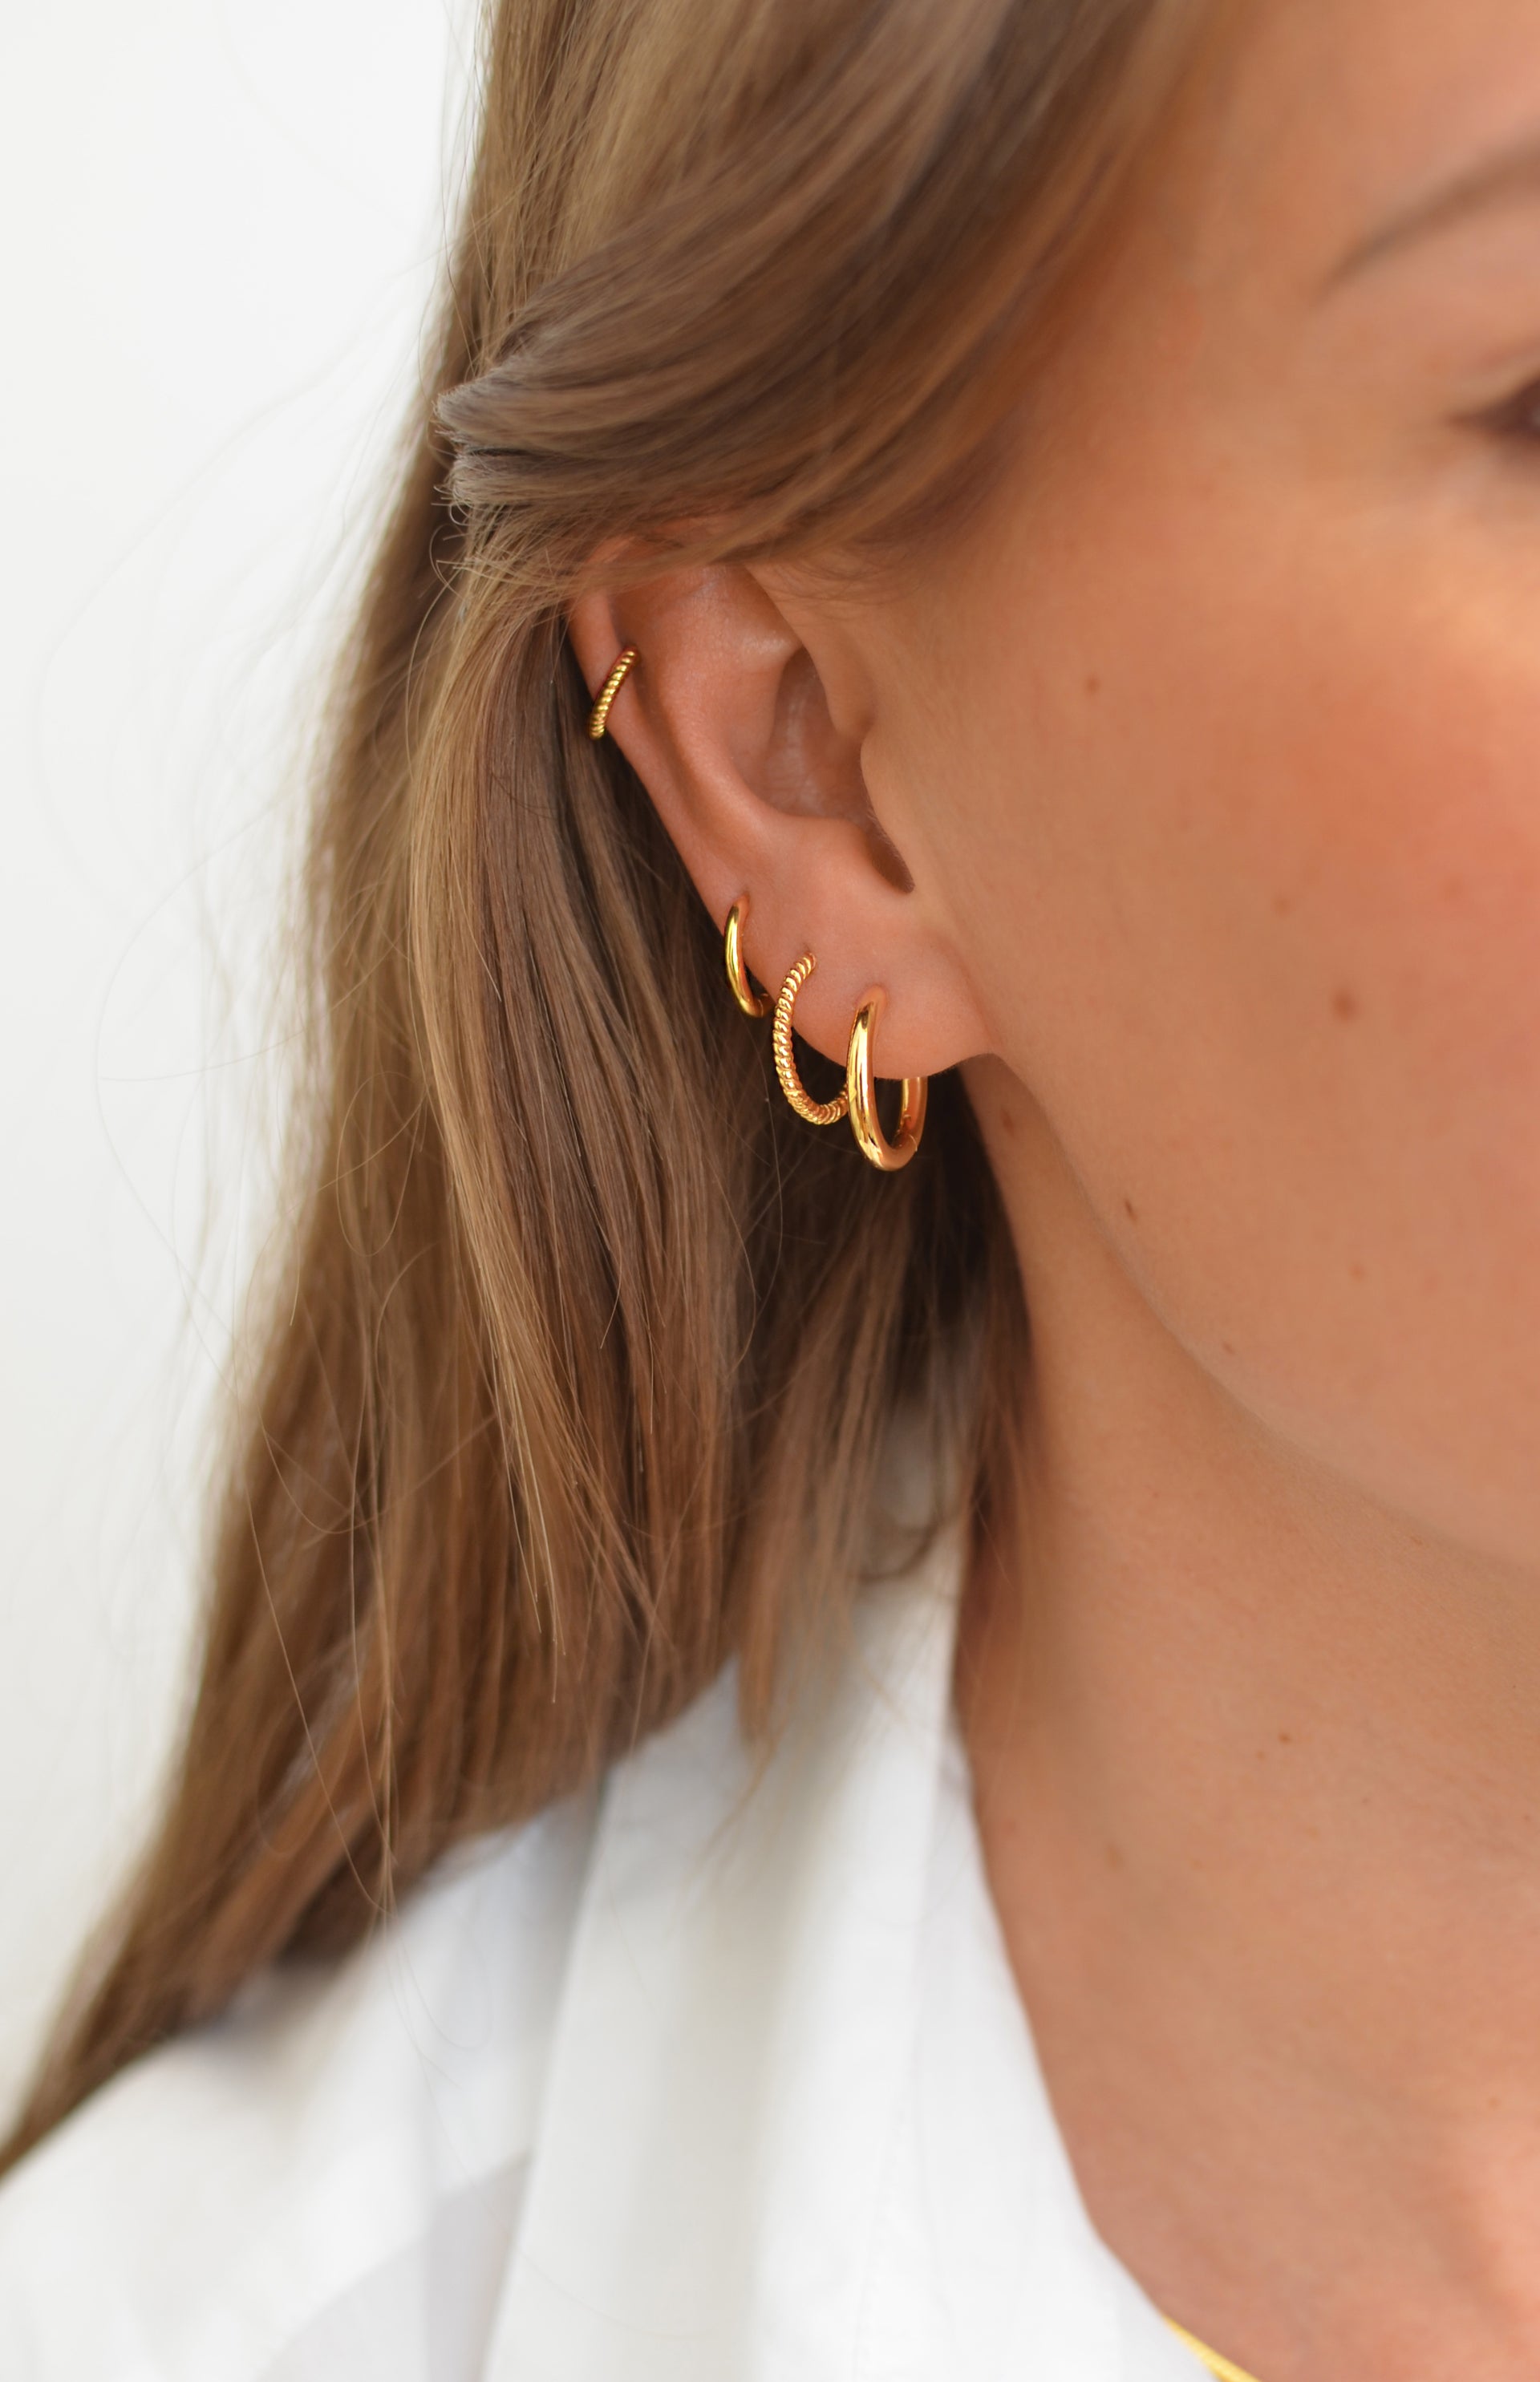 The hoops stacking with gold hoops in different sizes and two twisted gold hoops